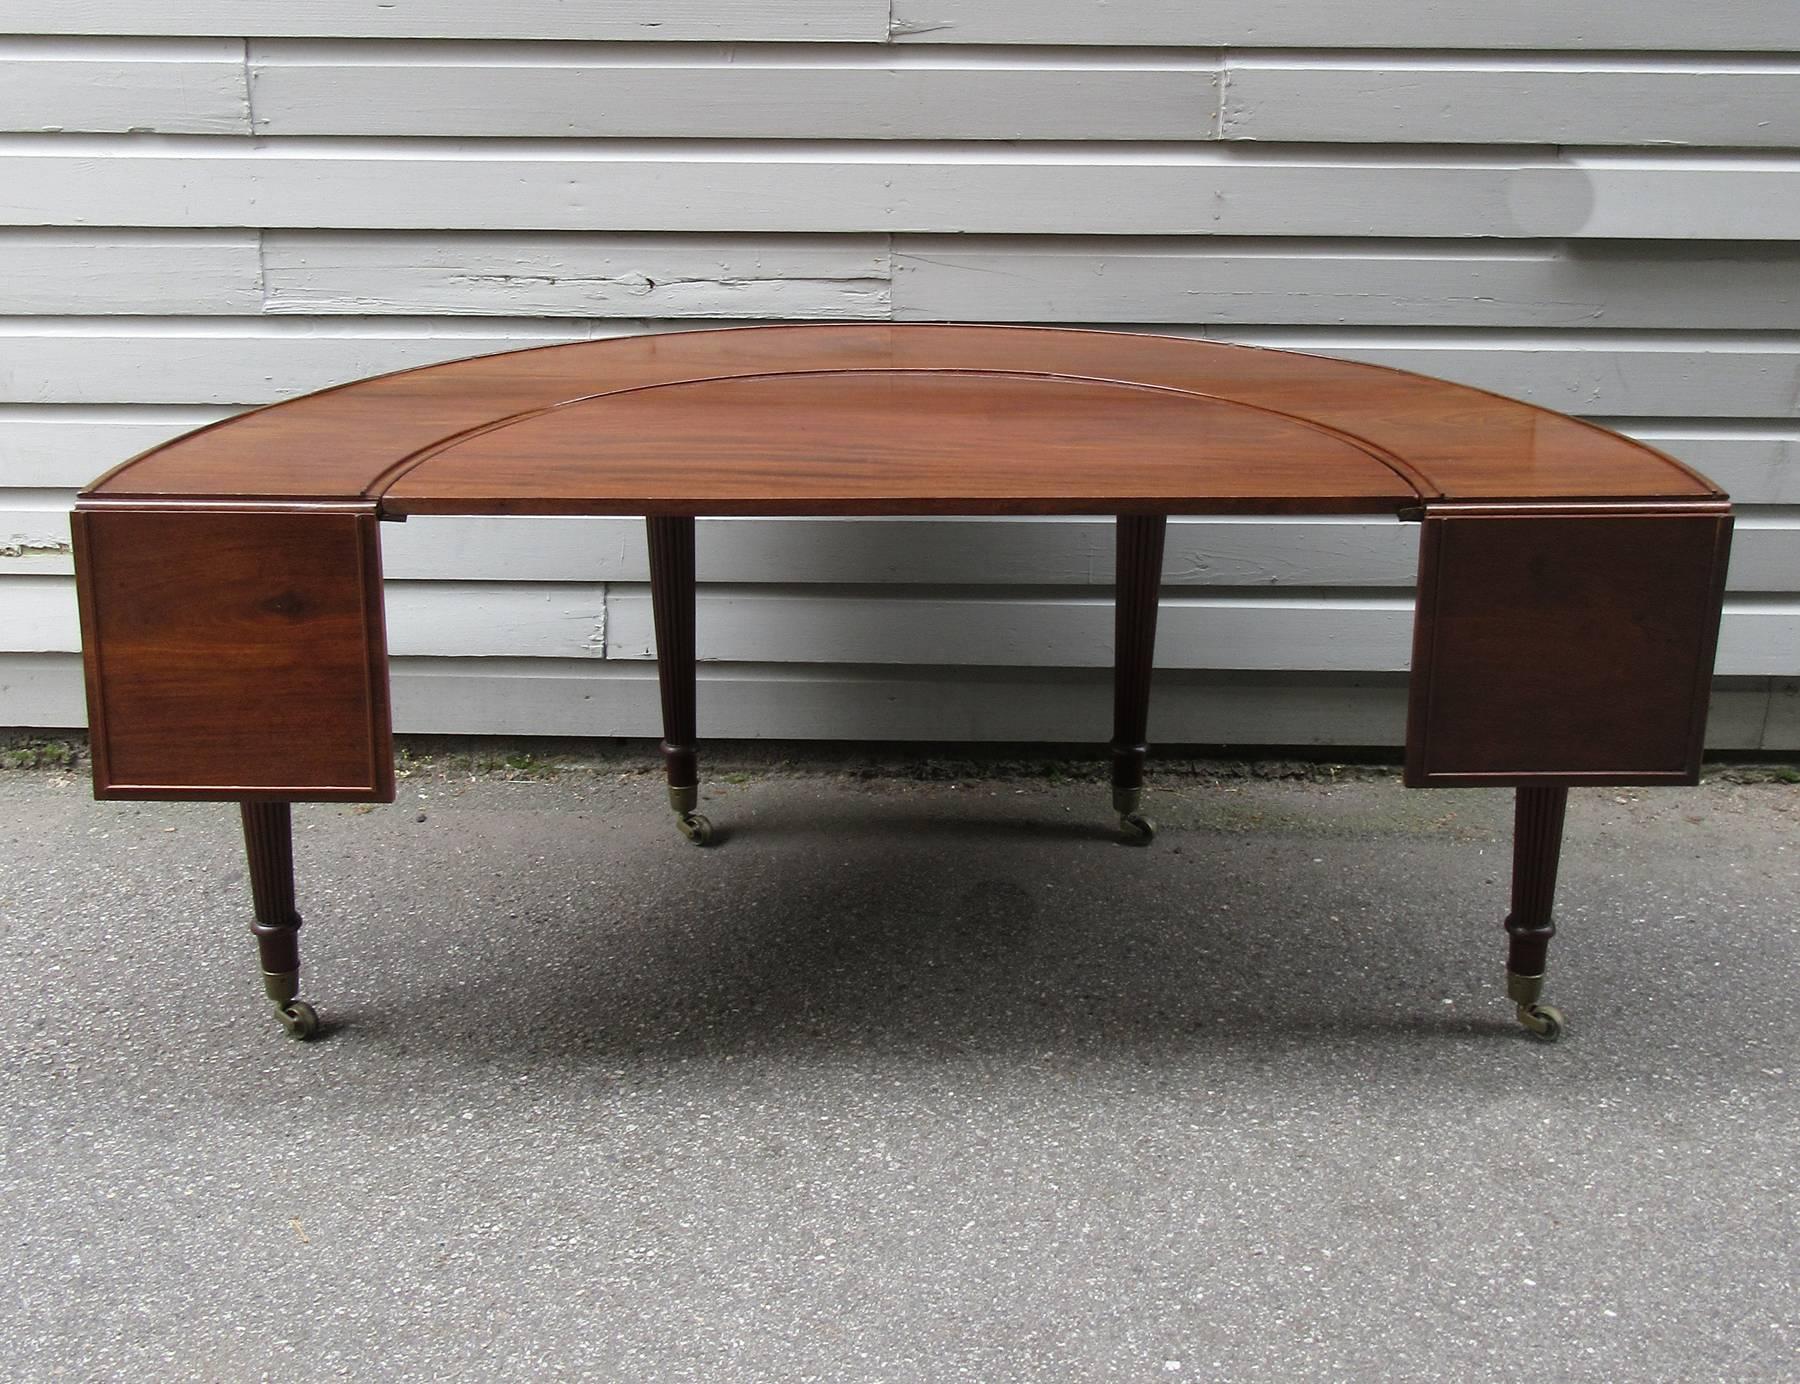 Early 19th Century English Regency Mahogany Social Table Attributed to Gillows In Good Condition For Sale In Charleston, SC